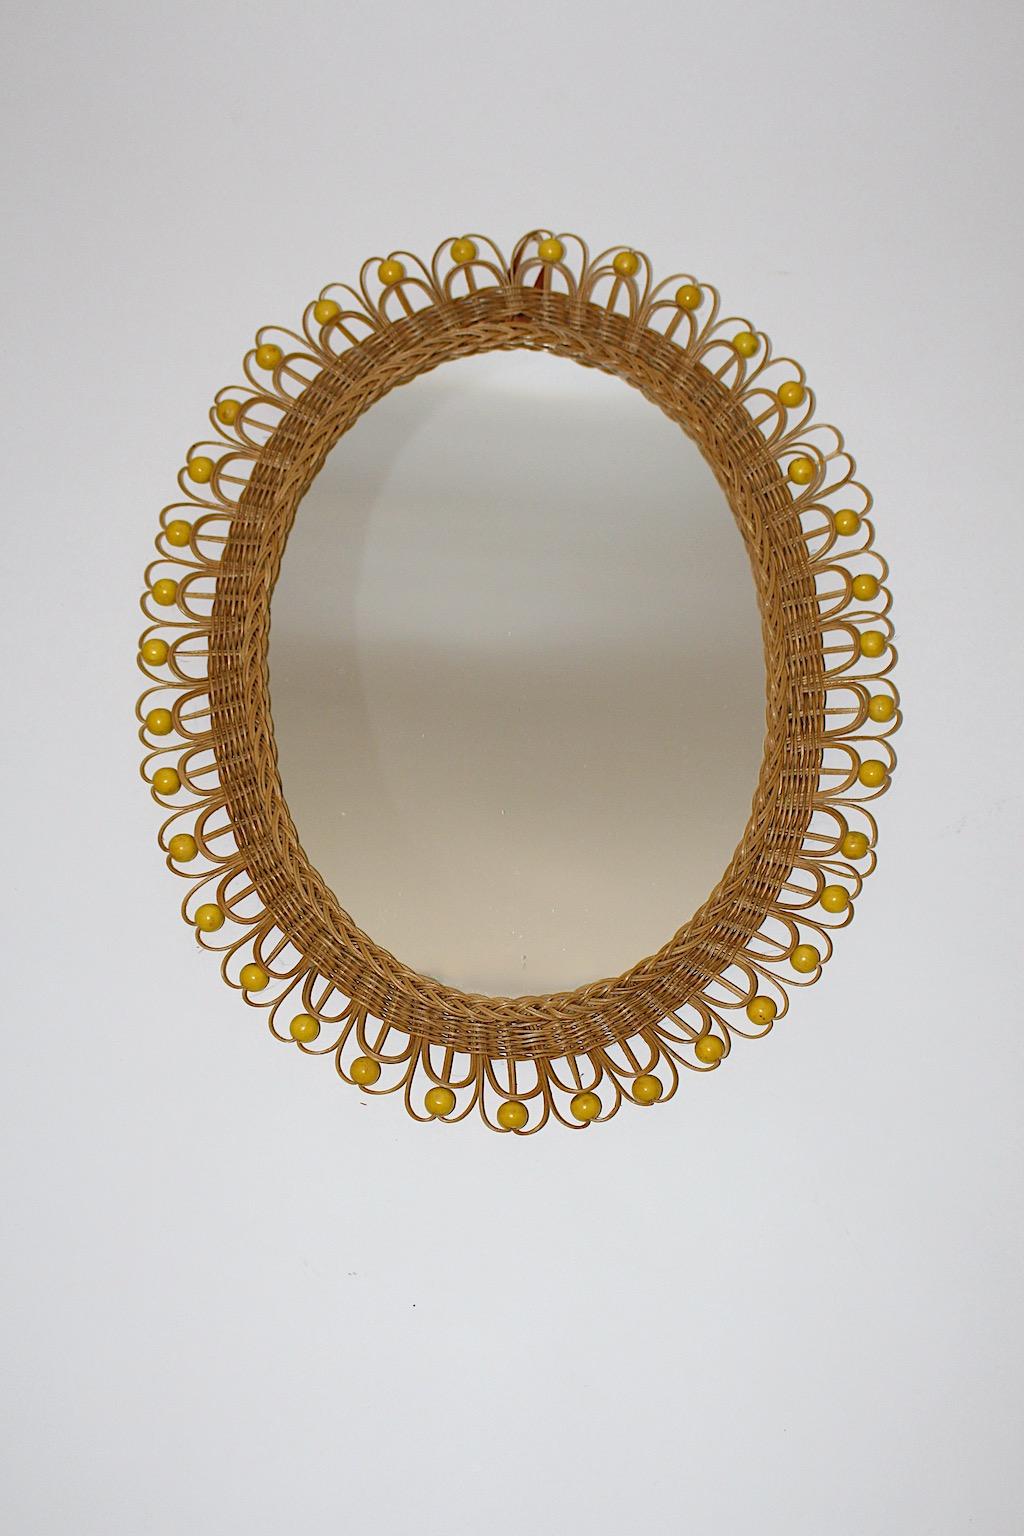 Rattan Willow organic Mid-Century Modern peacock wall mirror oval like 1970s Austria.
An oval wall mirror features a wrapped frame from rattan with yellow wooden pearls as amazing decor peacock like, while the rattan loops are slightly curved,